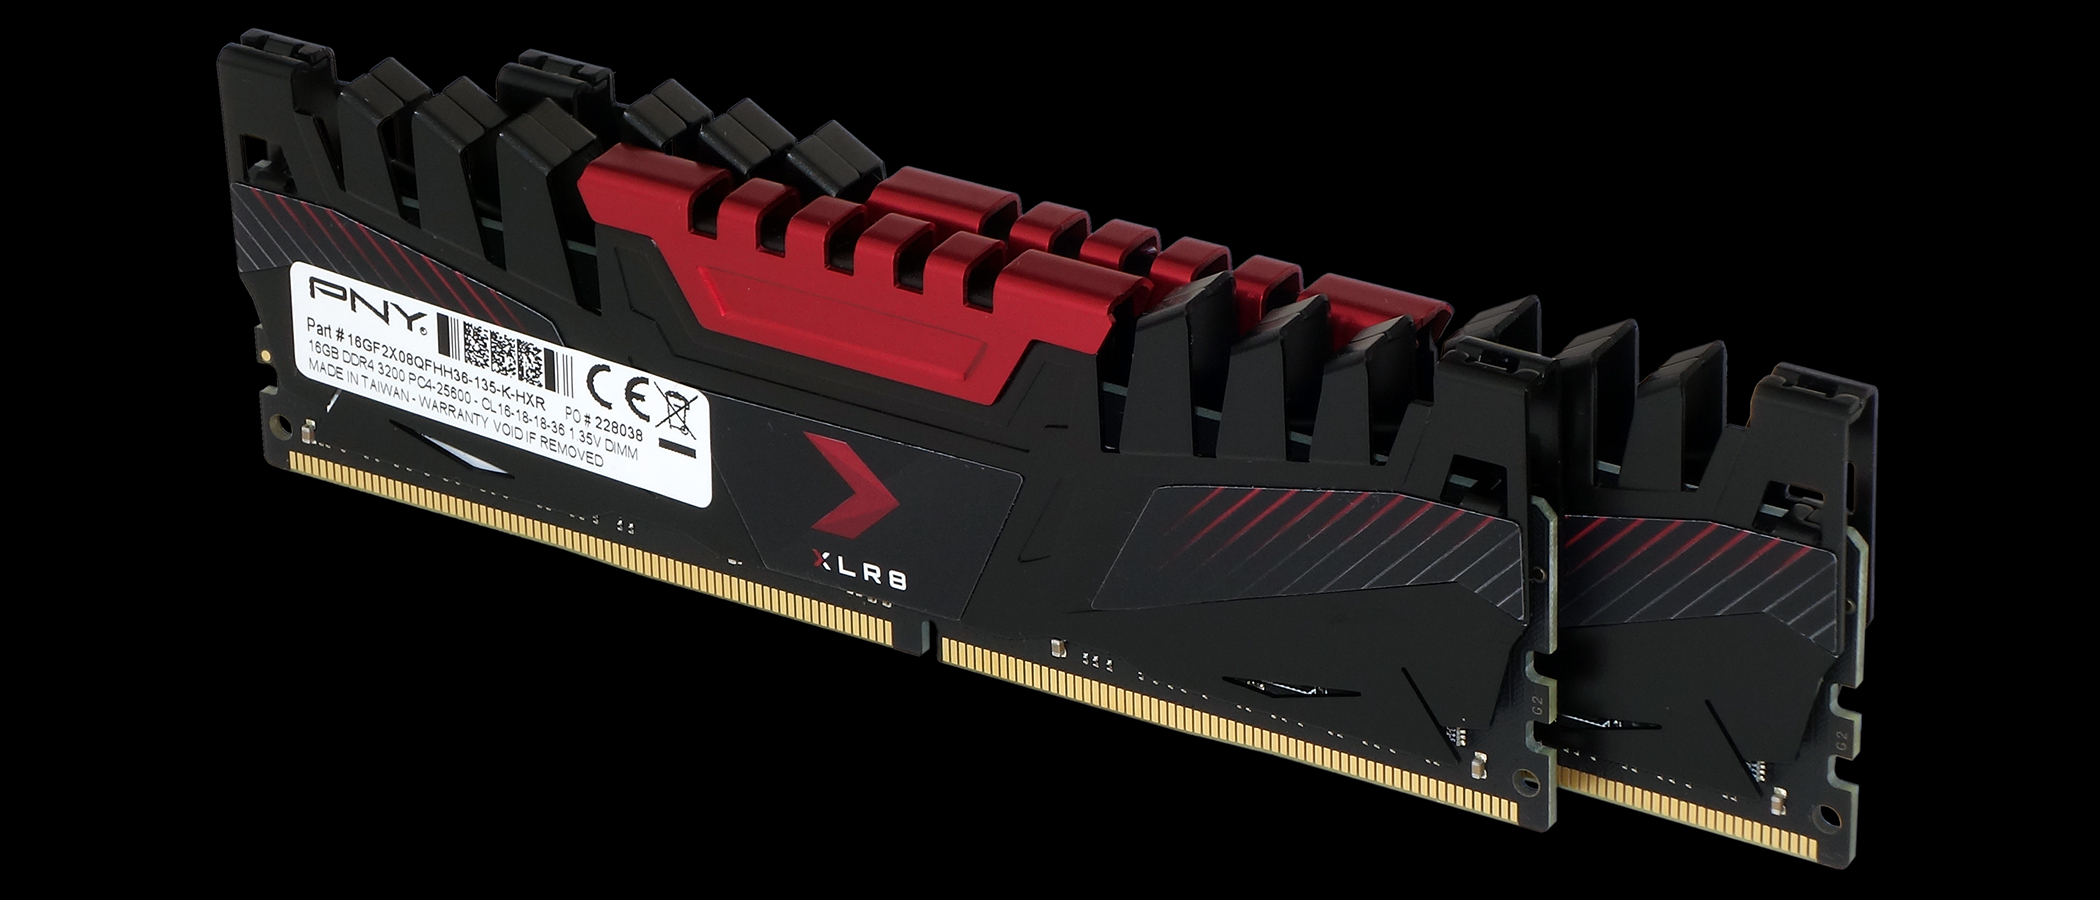 PNY XLR8 DDR4-3200 Review: A Really Big Deal? |